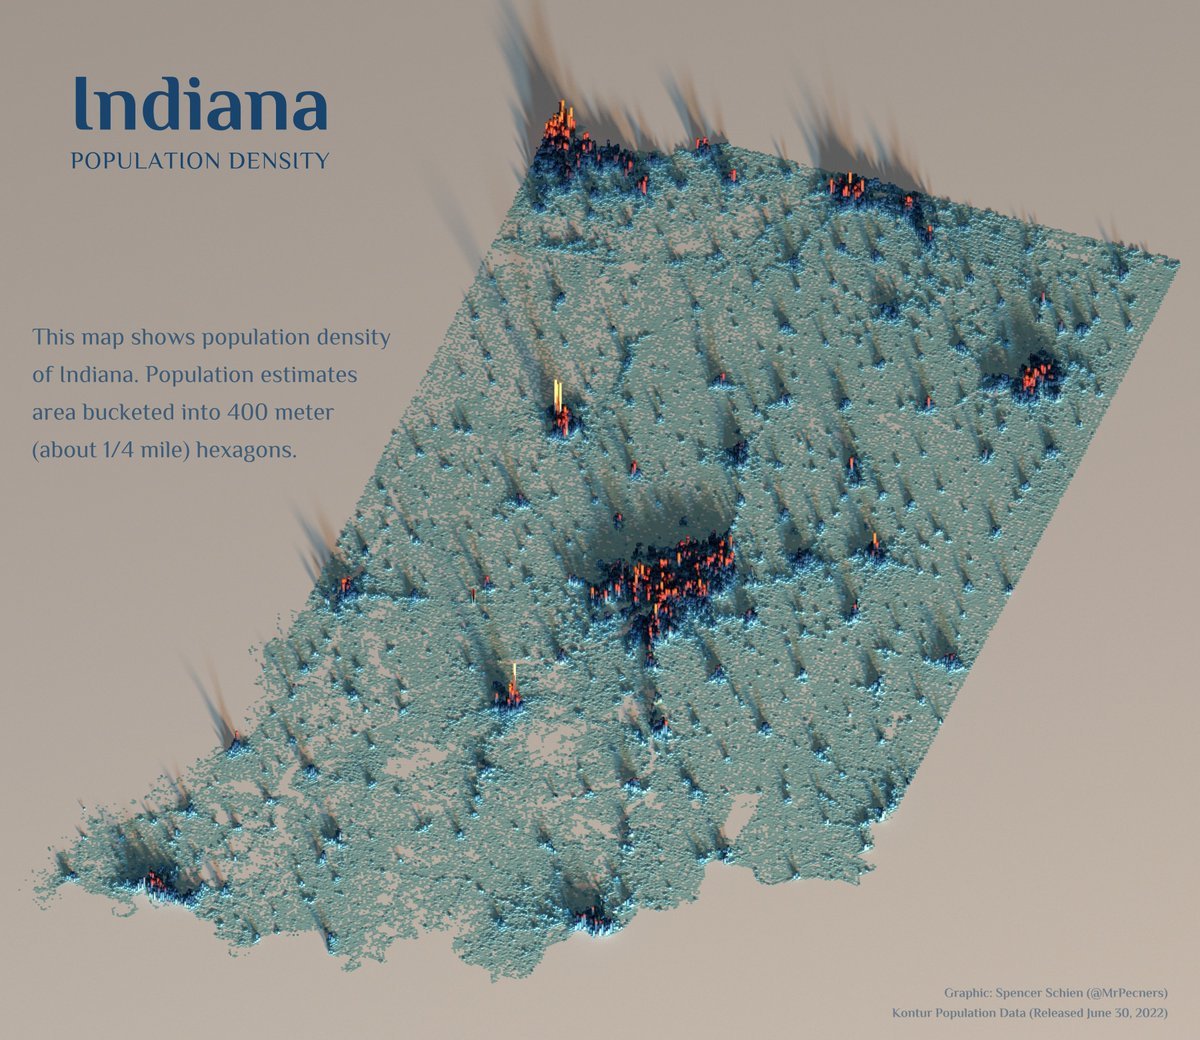 Indiana population density. by MrPecners Maps on the Web